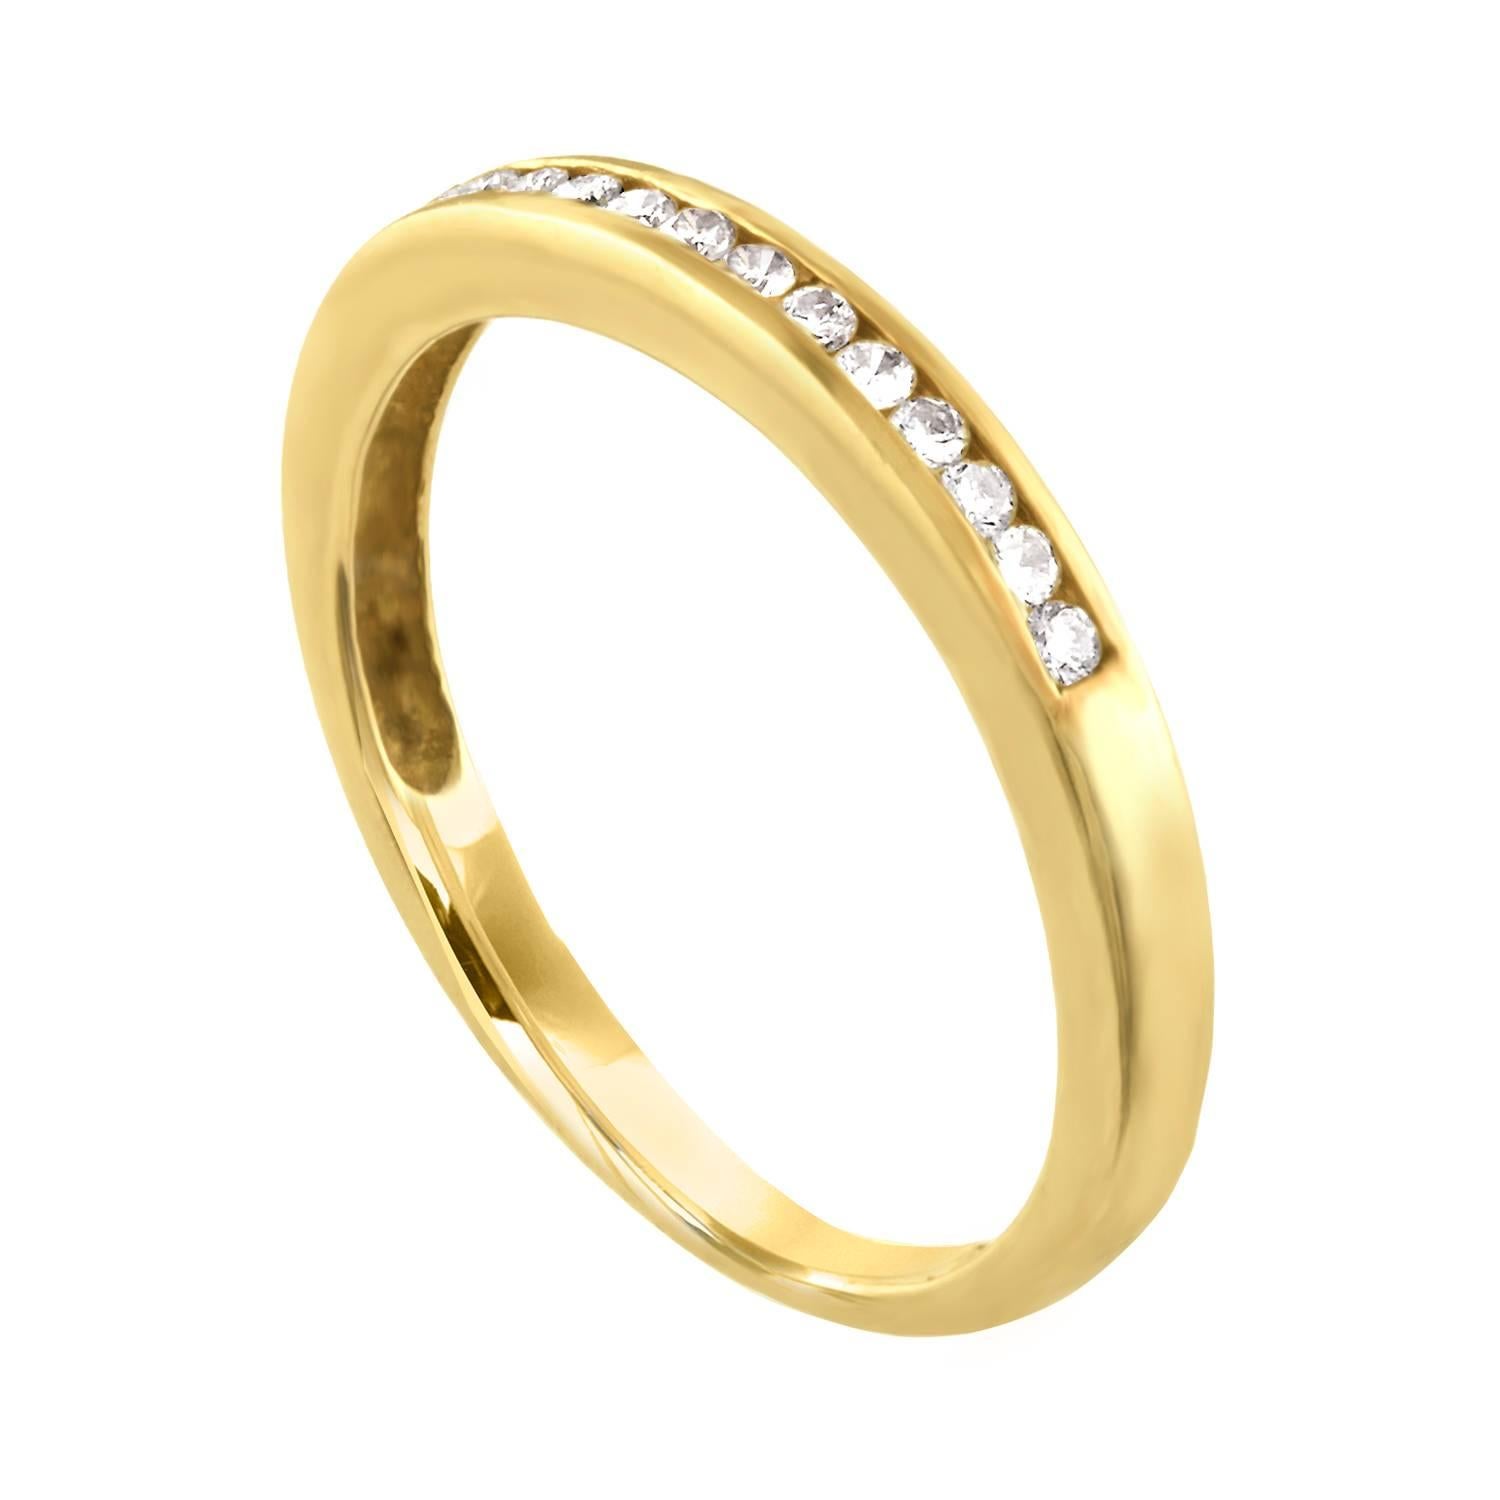 Channel Set Half Band Ring
The ring is 18K Yellow Gold.
There are 0.12 Carats In Diamonds G SI2
The ring is a size 4.5, sizable.
The ring is 2.25mm wide.
The ring weighs 1.6 grams